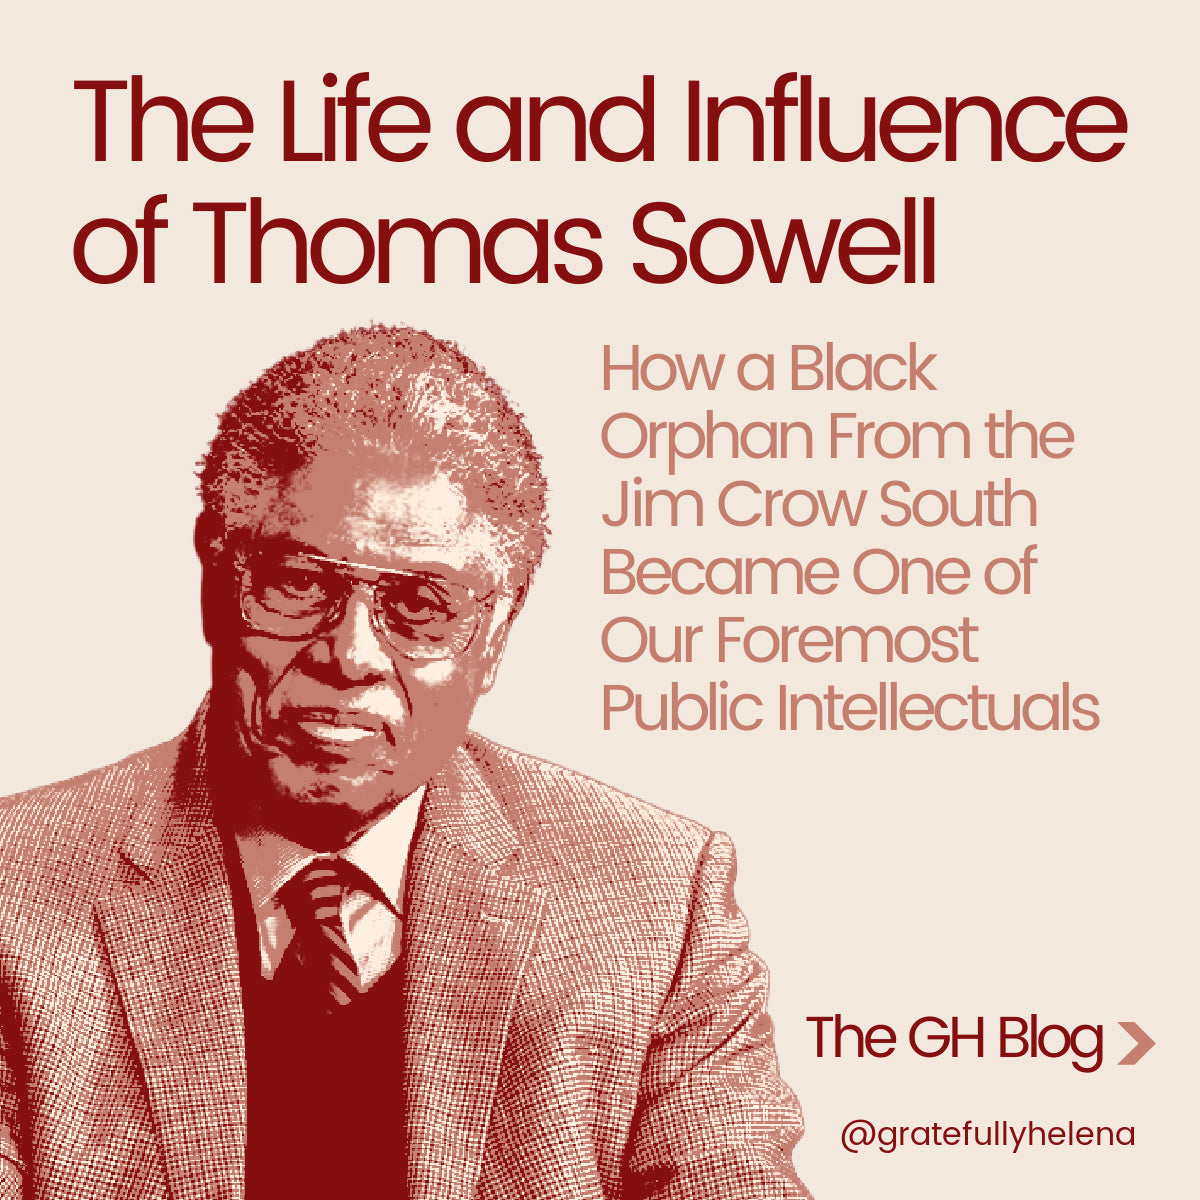 The Life and Influence of Thomas Sowell